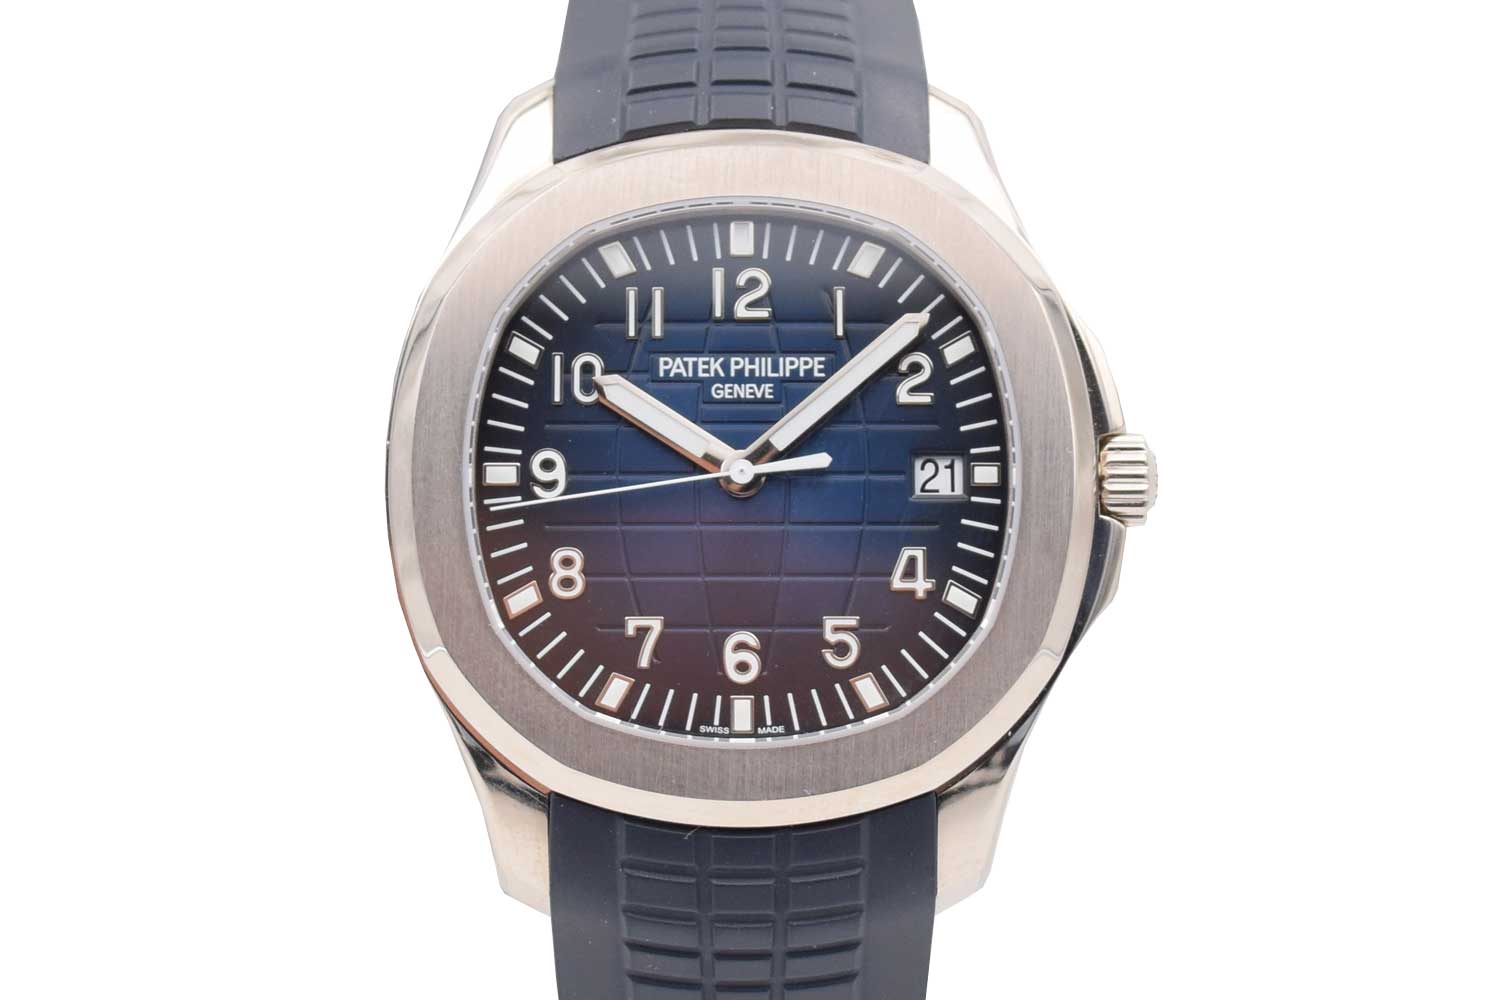 Patek Philippe Aquanaut in white gold case and blue dial, Ref. 5168G